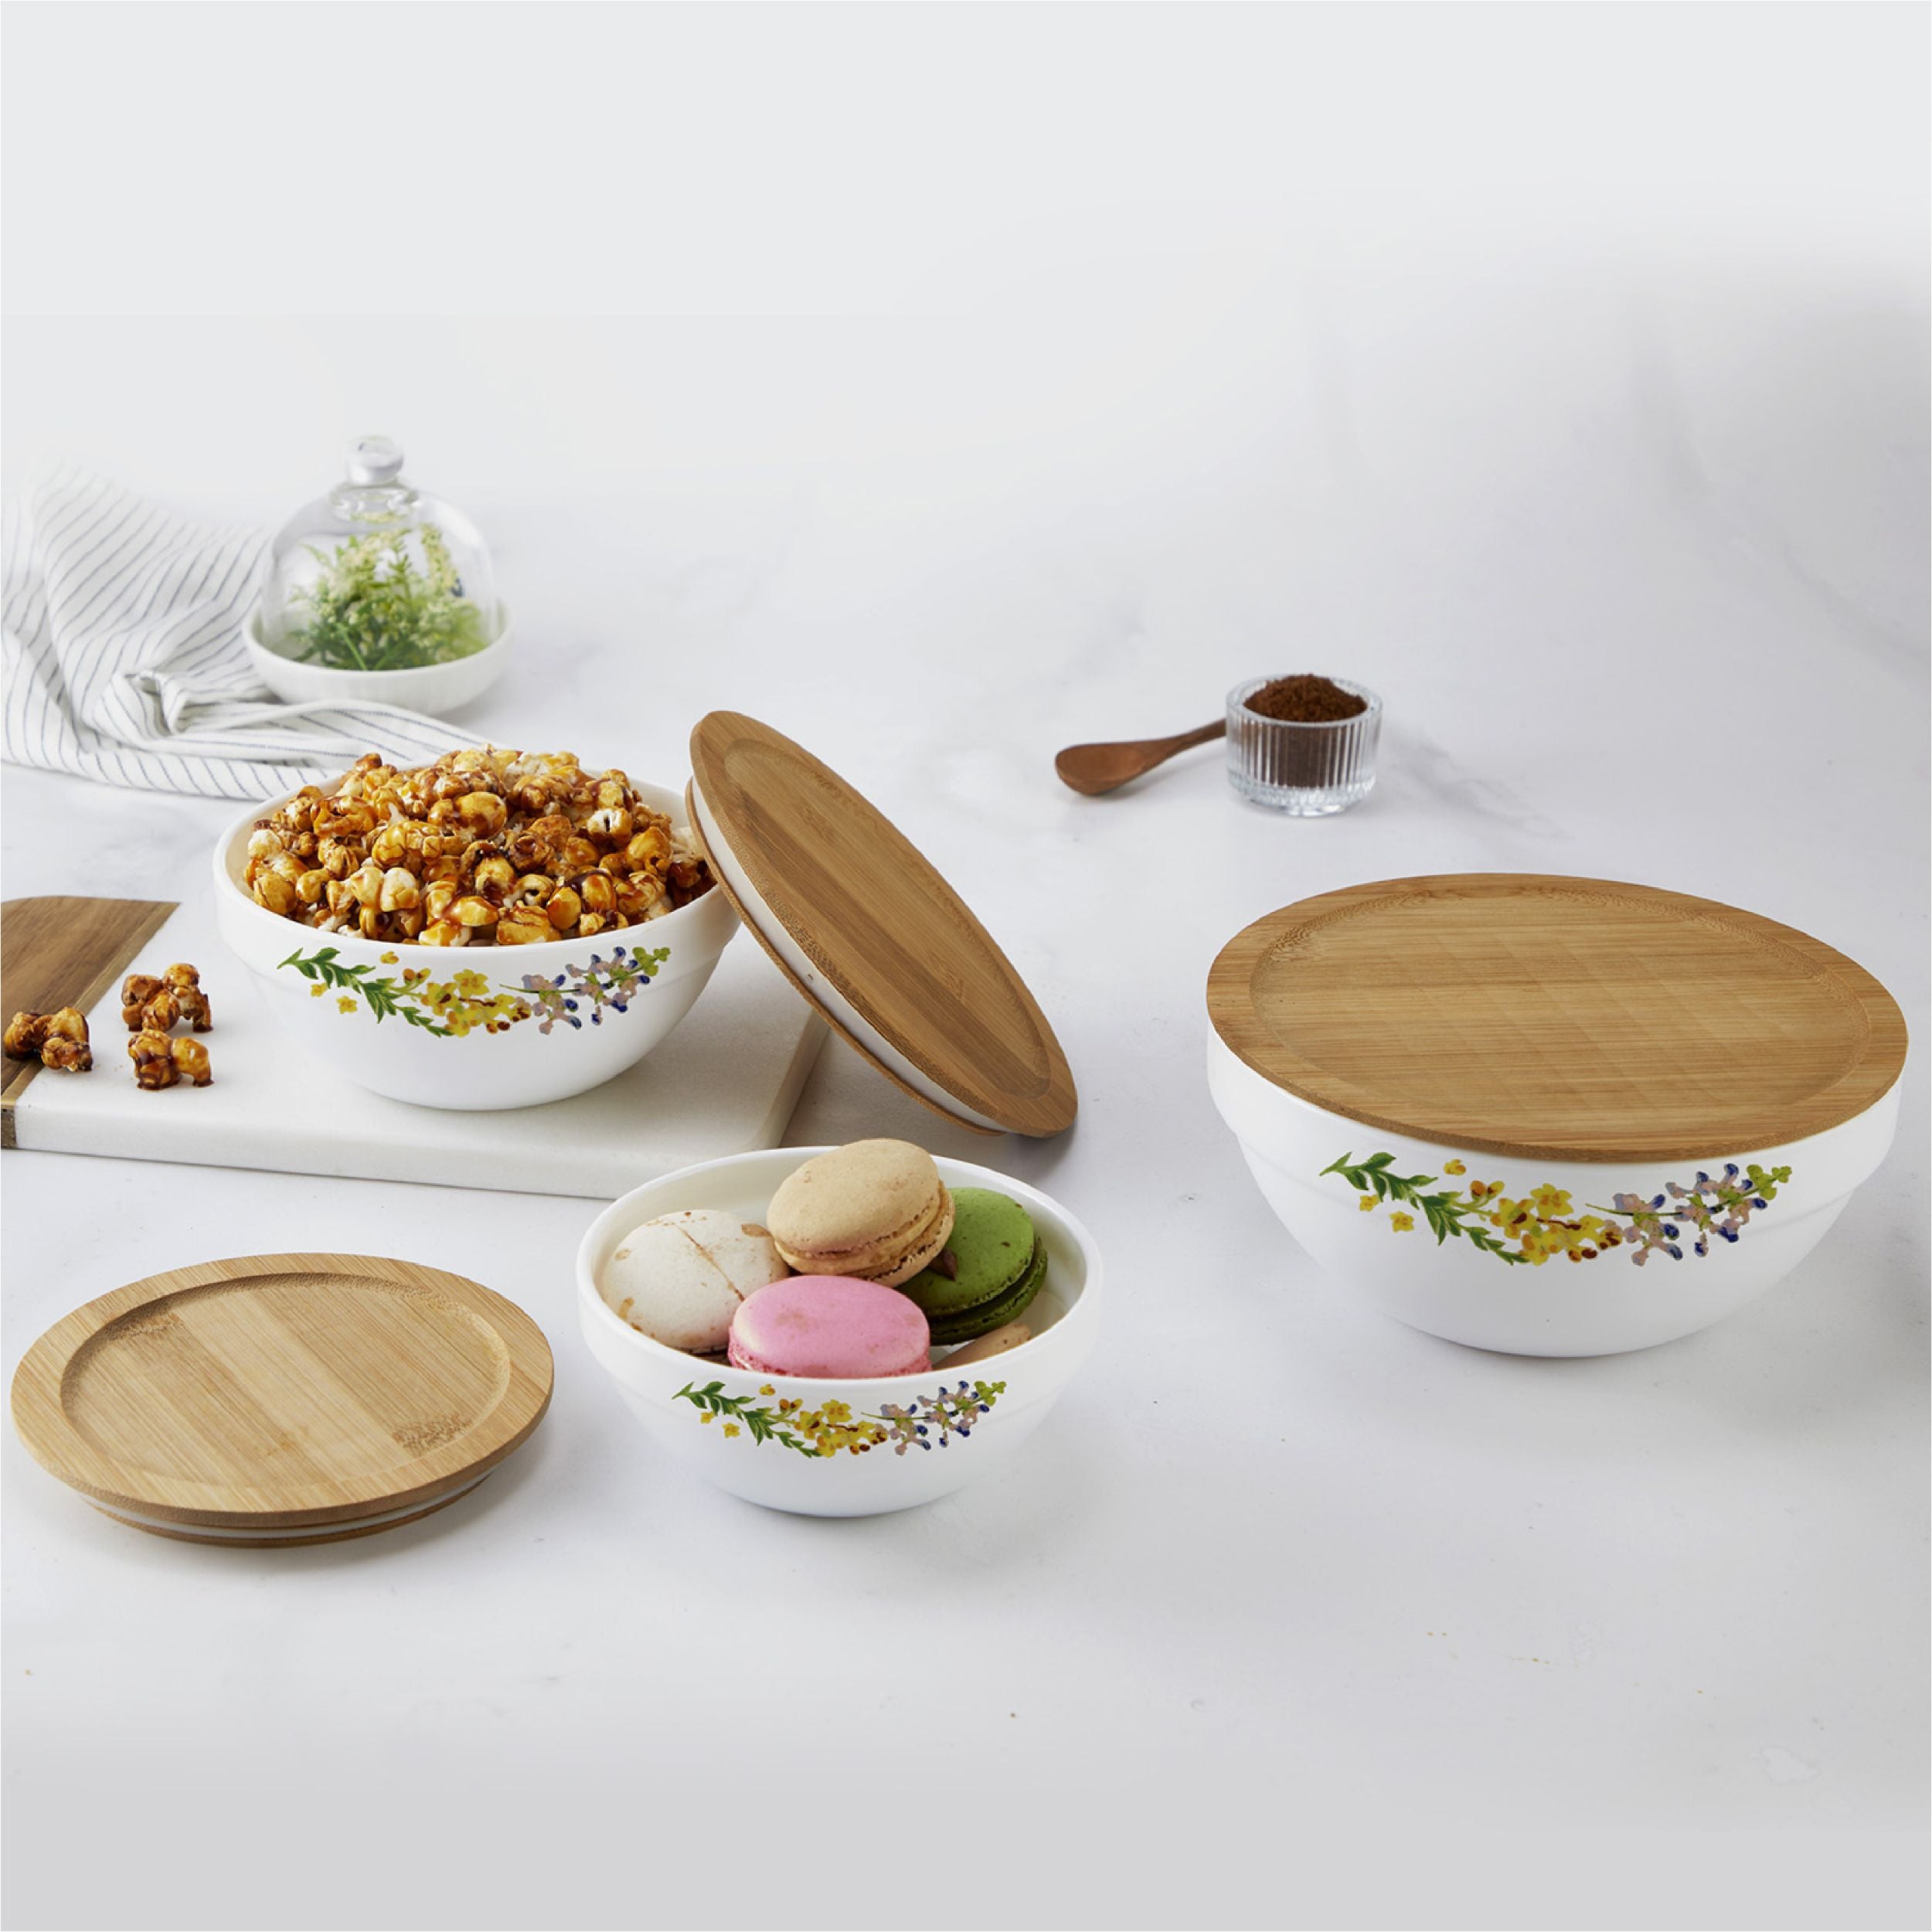 Royale Series Mixing bowls with bamboo lid Gift Set, 3 Pieces Botanica / 3 Pieces